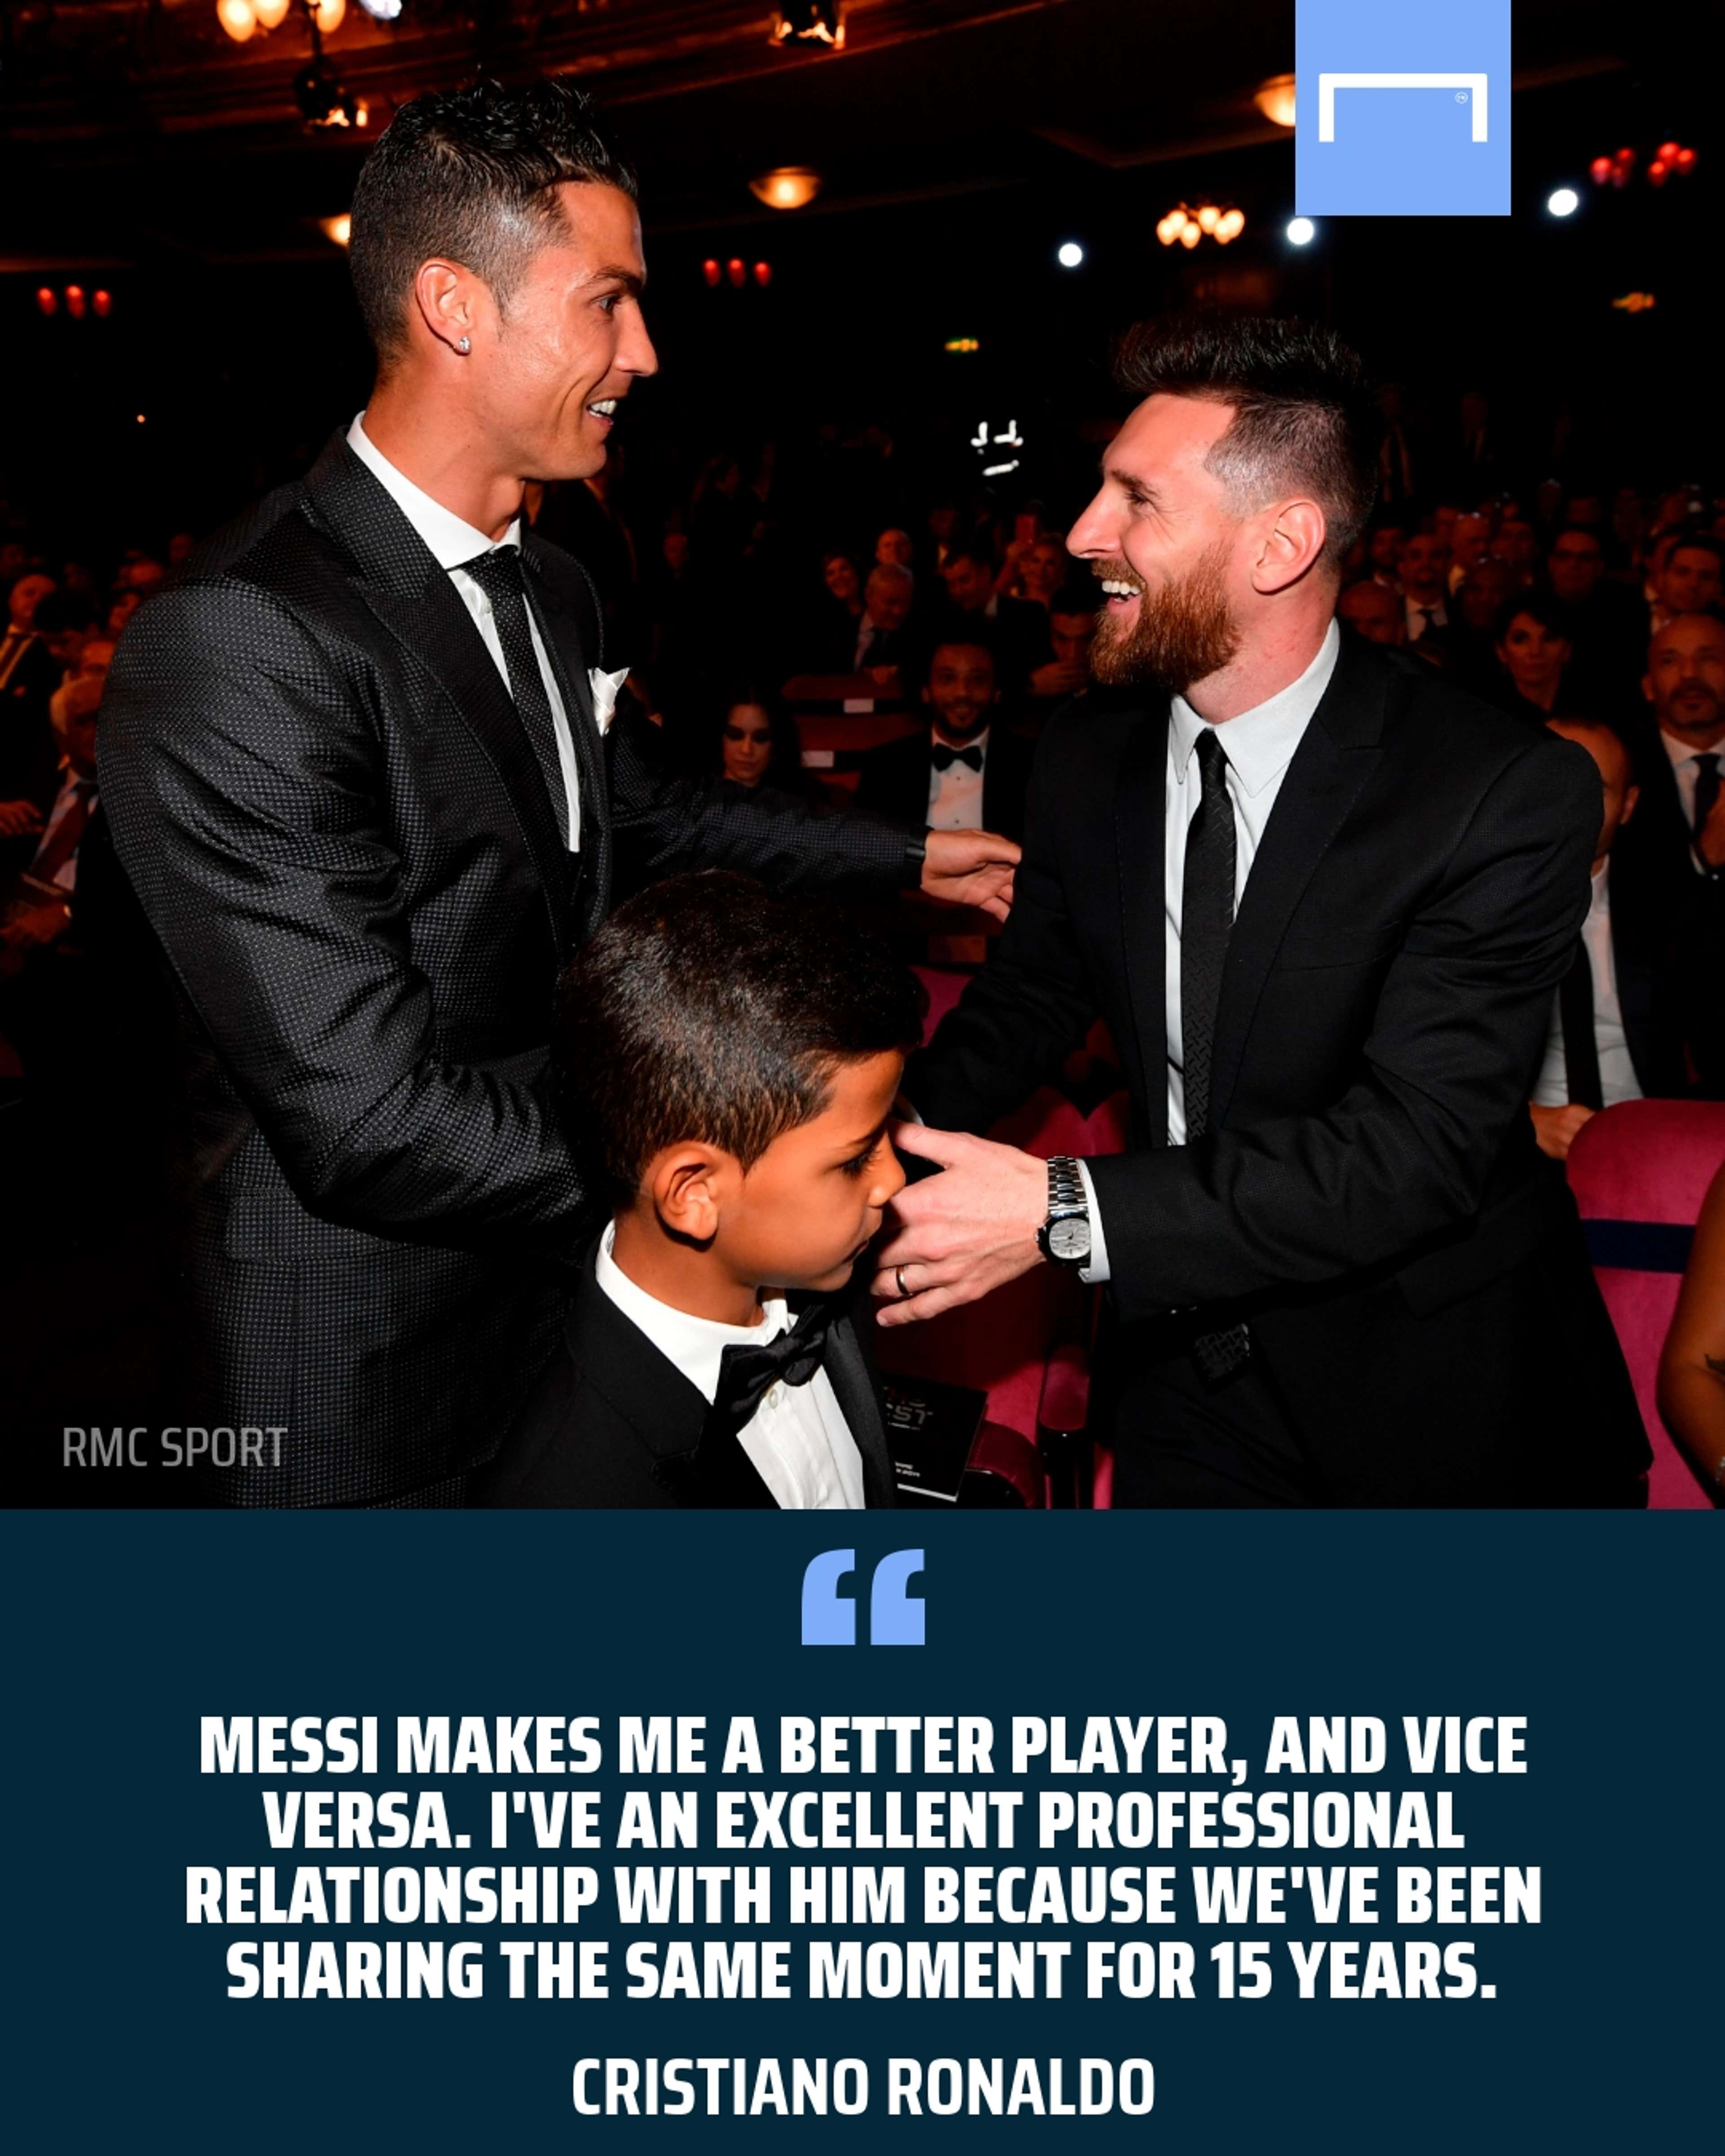 Ronaldo: Messi has made me a better player and vice versa